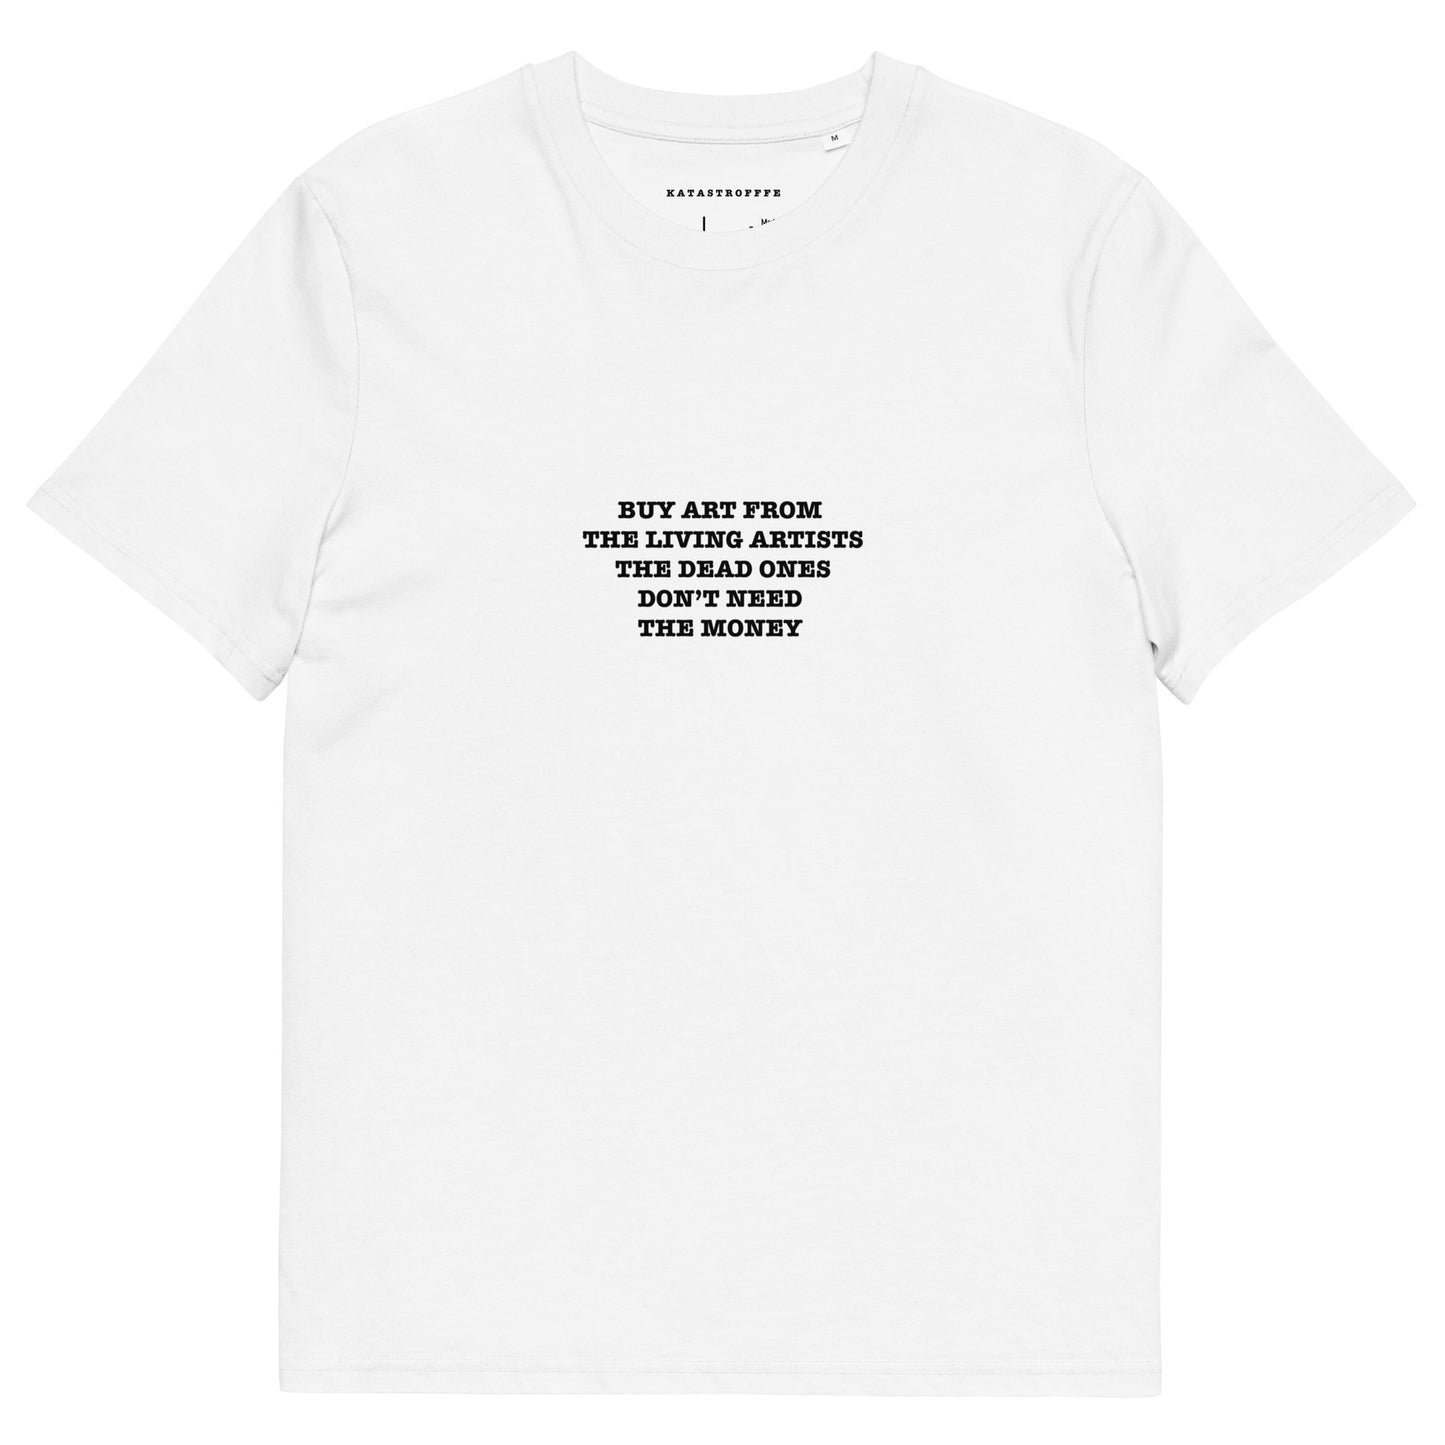 BUY ART FROM  THE LIVING ARTISTS THE DEAD ONES DON’T NEED  THE MONEY Unisex organic cotton t-shirt